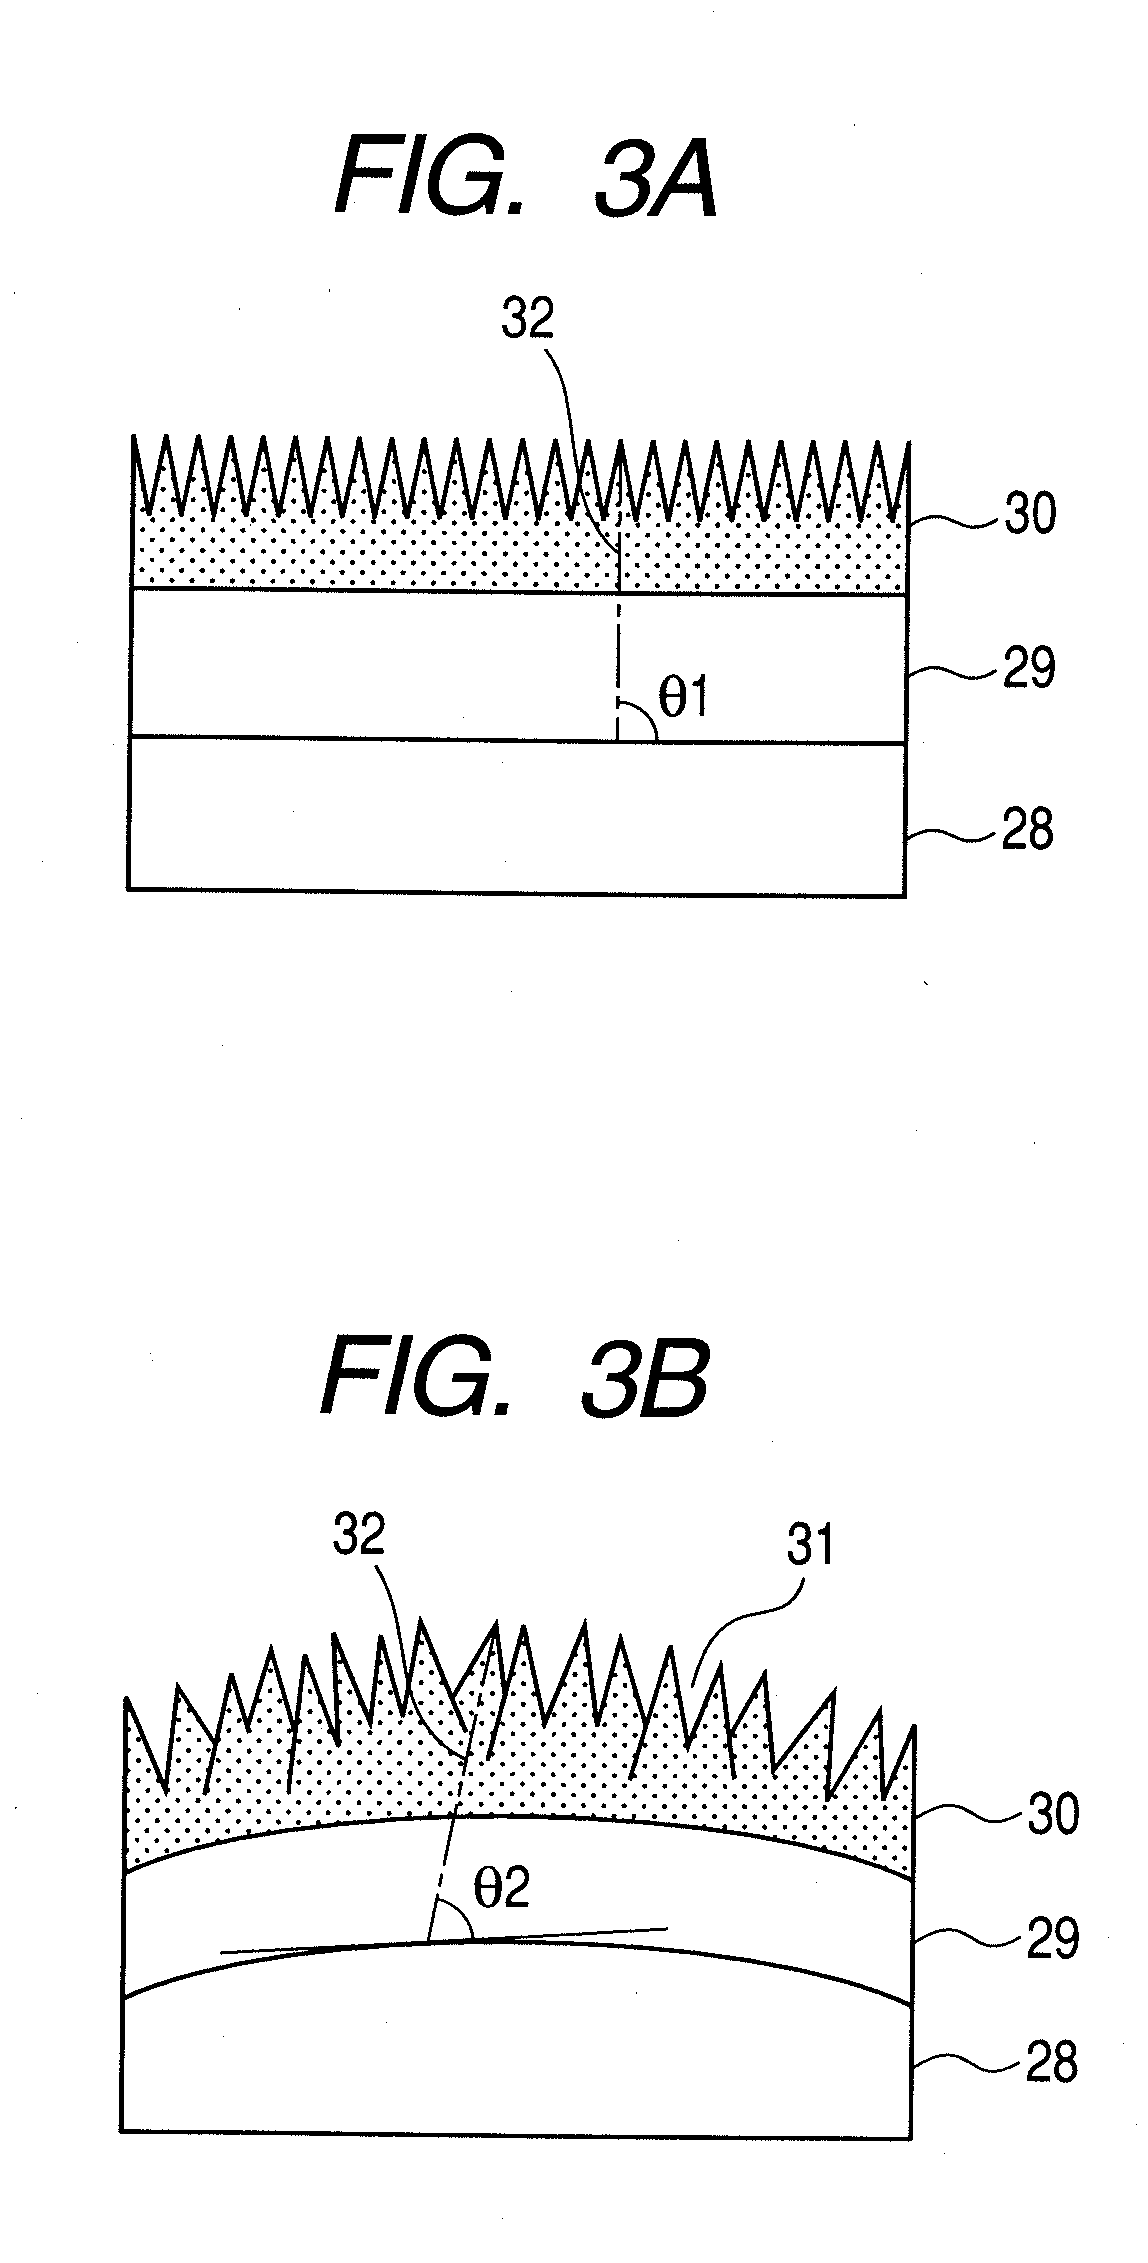 Optical member, optical system using the optical member, and method of manufacturing an optical member